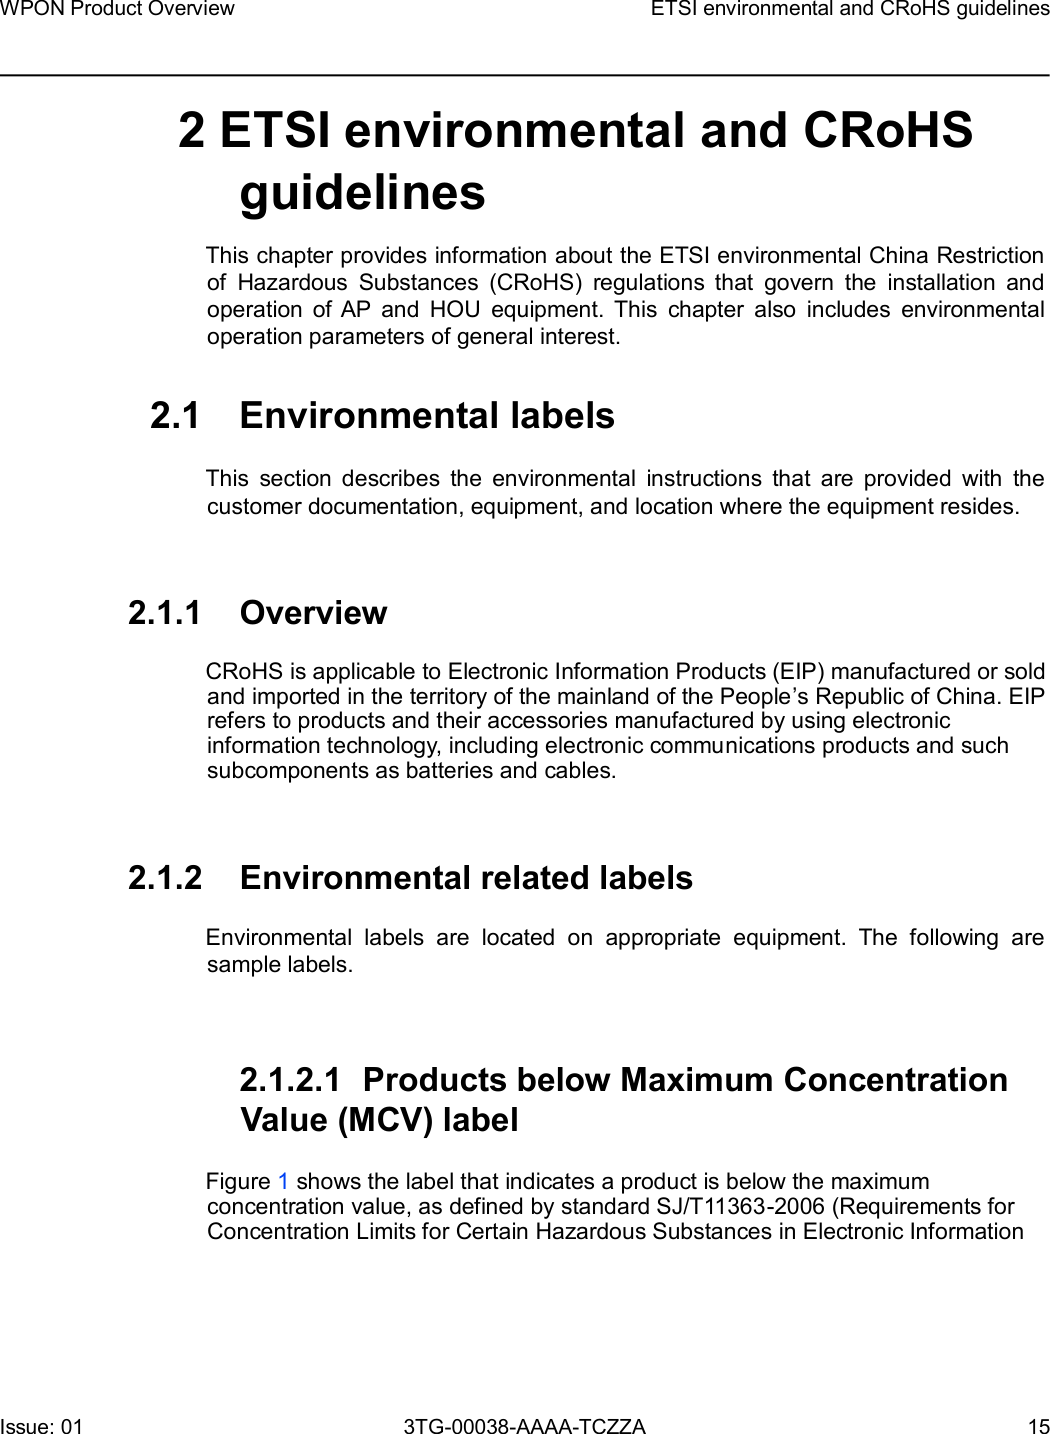 Page 15 of Nokia Bell 7577WPONAPDC WPON User Manual WPON Product Overview